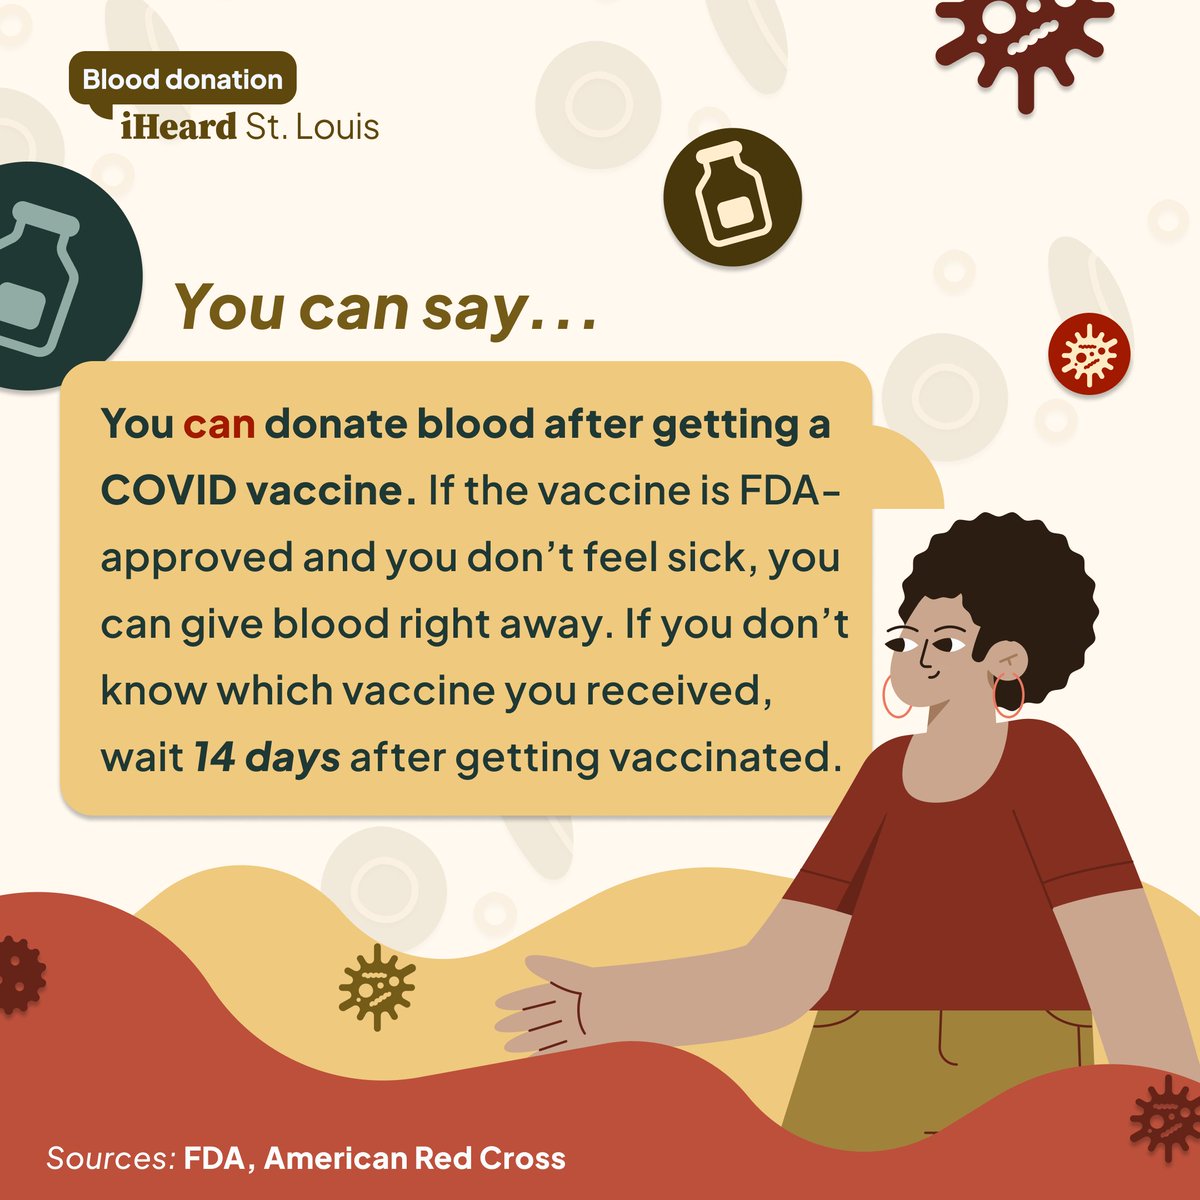 You can donate blood after getting a COVID vaccine. If the vaccine is FDA-approved and you don’t feel sick, you can give blood right away. If you don’t know which vaccine you got, wait 14 days after getting vaccinated. #iHeardSTL #DonateBlood #COVIDVaccination